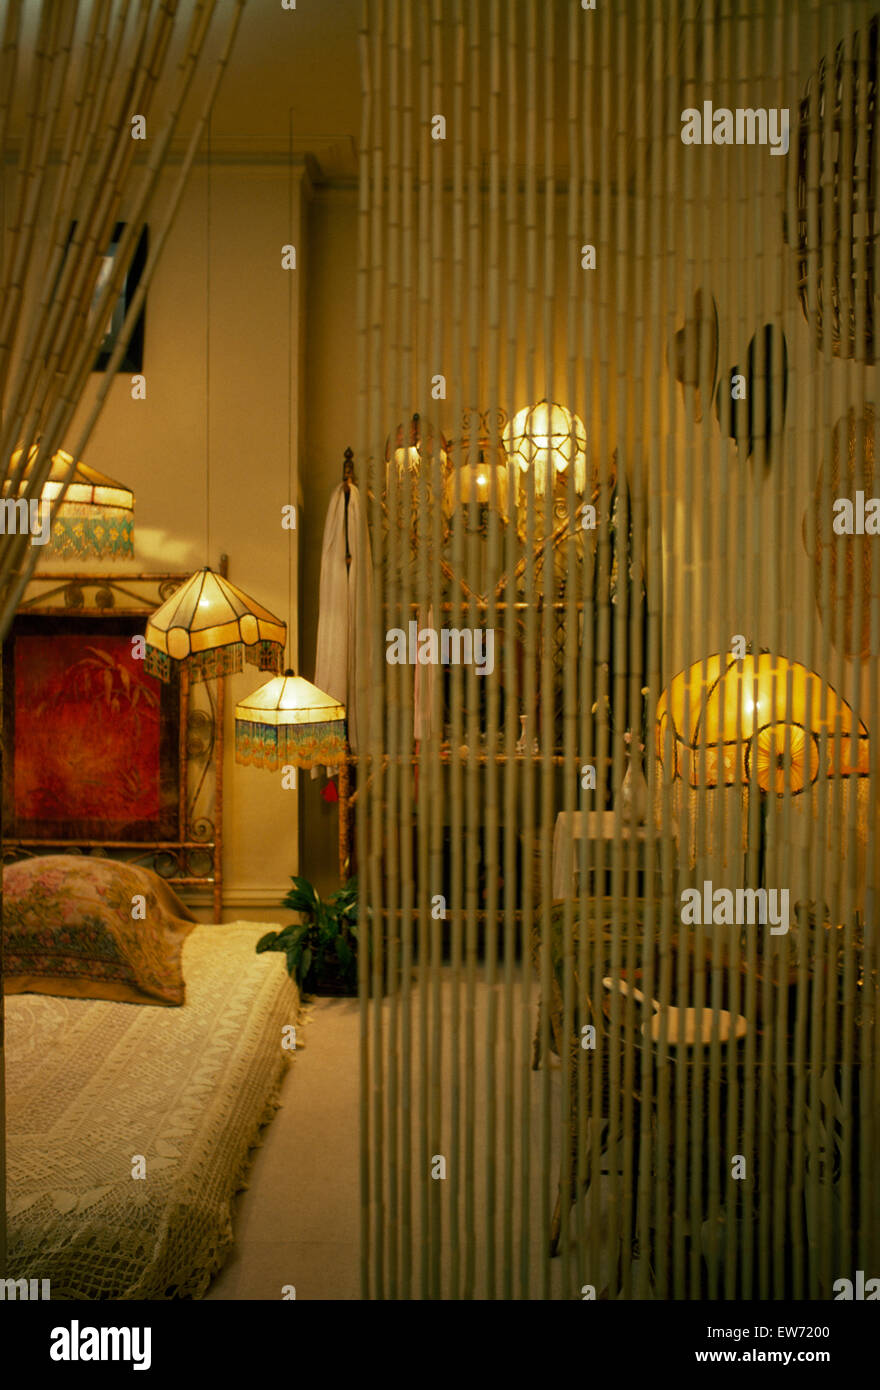 Bamboo curtain screening sixties bedroom with thirties lamps Stock Photo